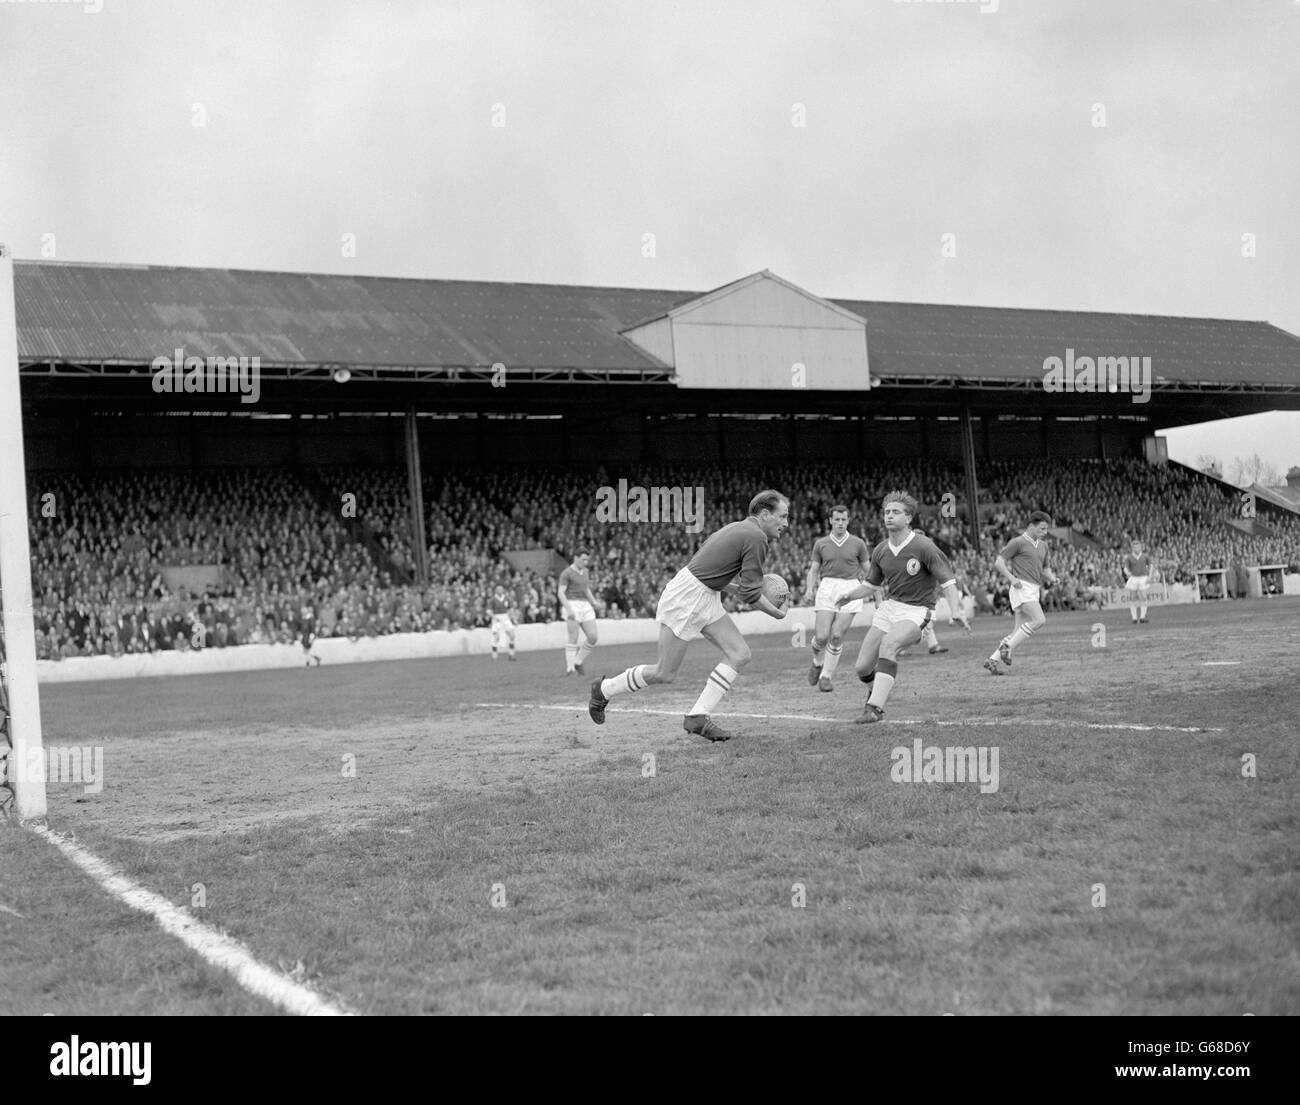 Liverpool's centre forward Dave Hickson rushes in as Leyton Orient goalkeeper David Groombridge clears the ball during the Second Division match at Brisbane Road in London. Archive-PA82948-2 Stock Photo